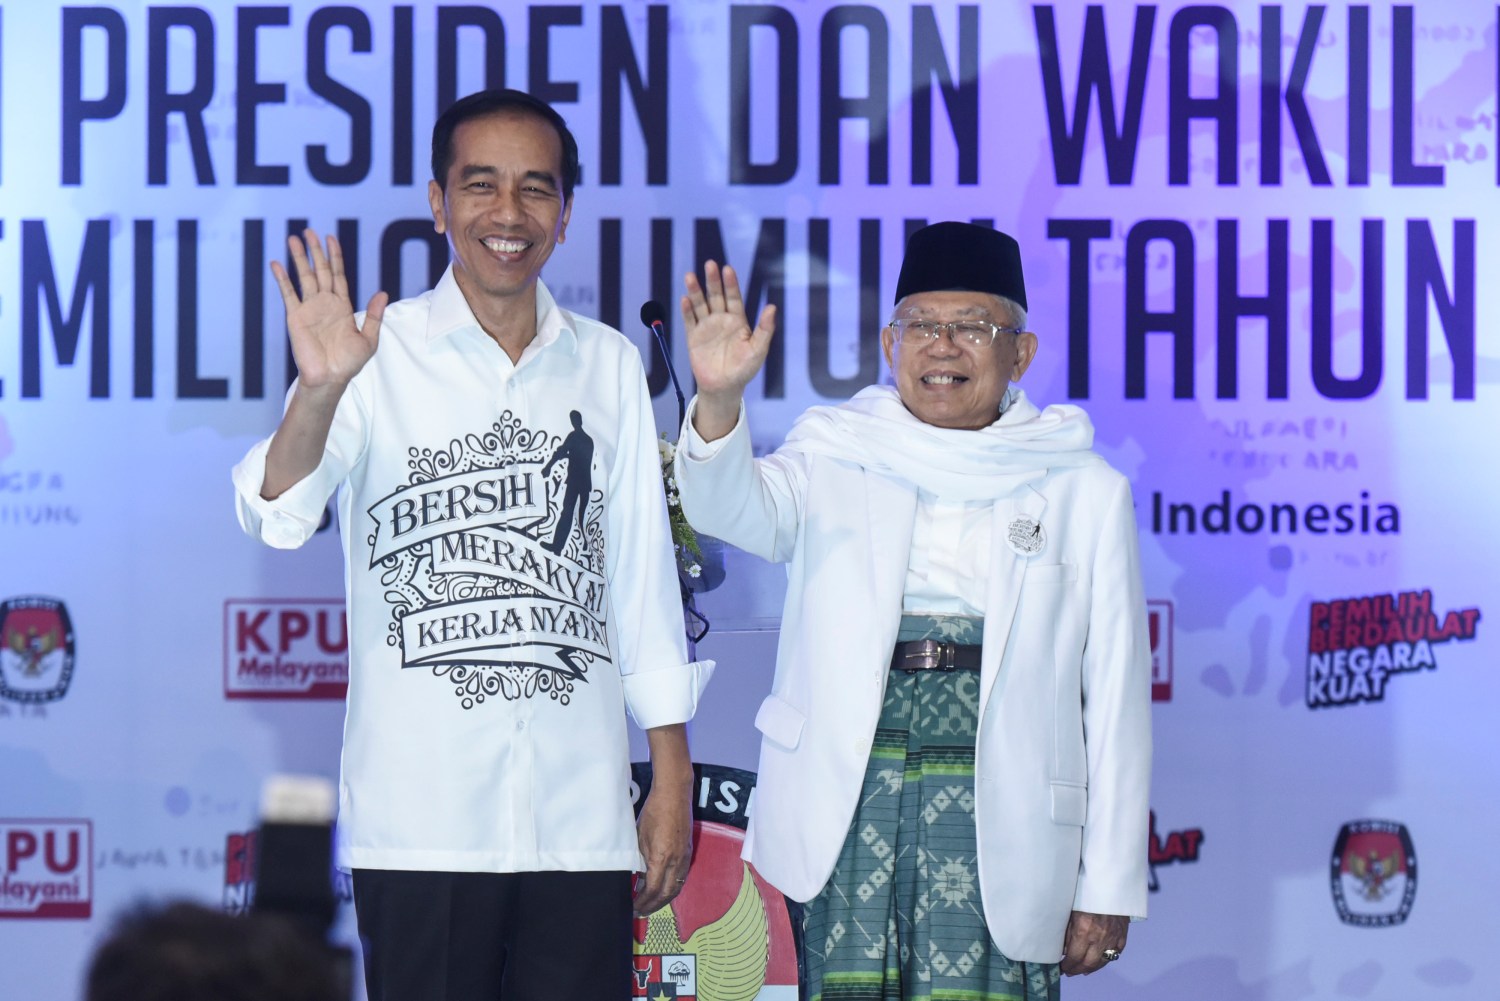 Indonesian President Joko Widodo and his running mate for the 2019 presidential election Islamic cleric Ma'ruf Amin wave after registering for the election at the General Election Commission in Jakarta, Indonesia August 10, 2018 in this photo taken by Antara Foto.  Antara Foto/Akbar Nugroho Gumay/via REUTERS   ATTENTION EDITORS - THIS IMAGE WAS PROVIDED BY A THIRD PARTY. MANDATORY CREDIT. INDONESIA OUT. - RC16976DBB40